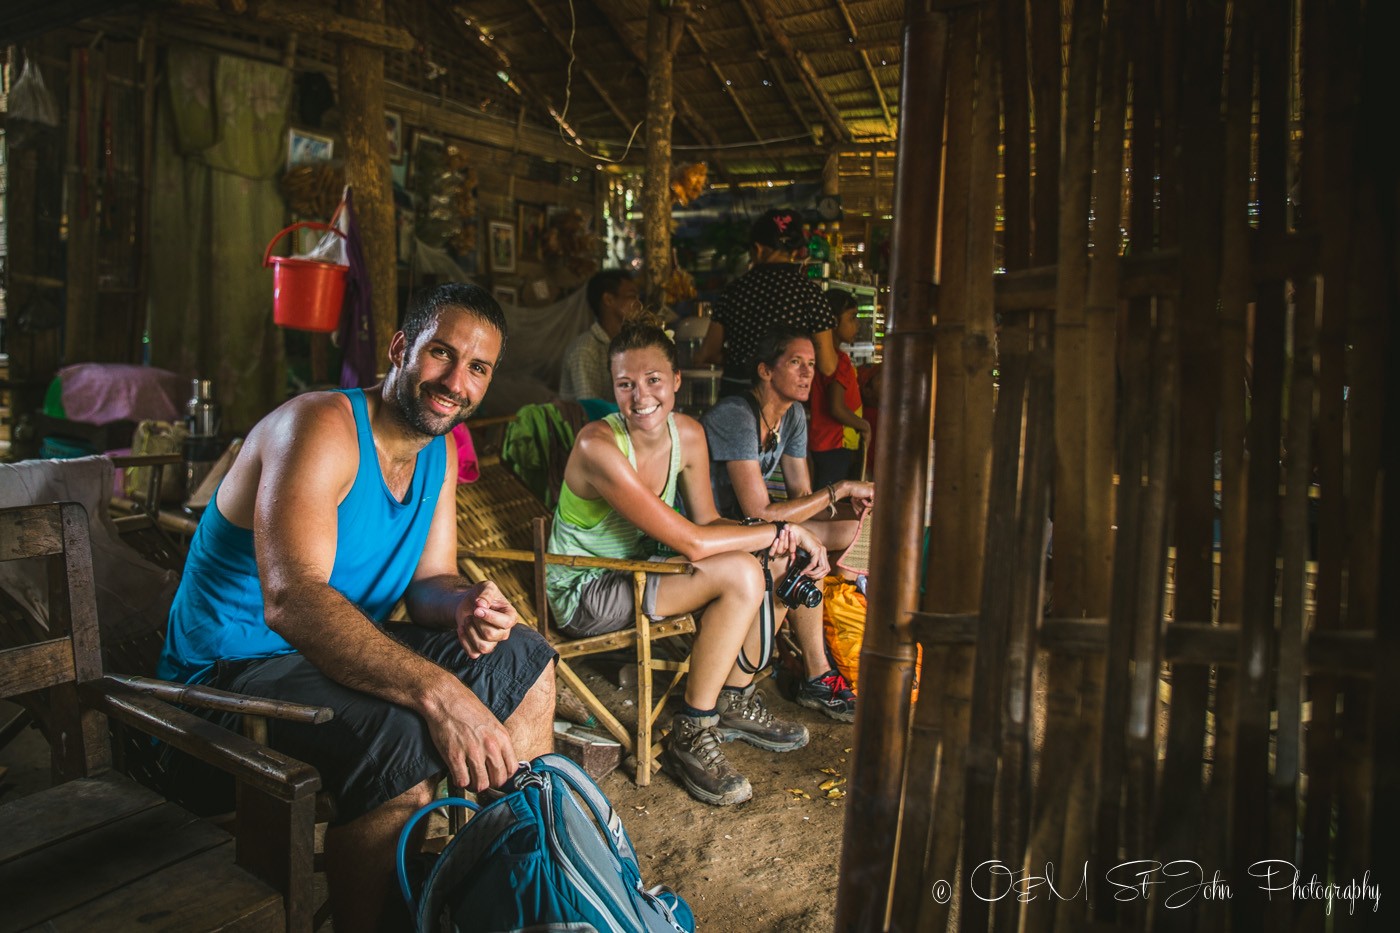 Taking abreak at a tiny shop along the trek to the hill tribe village in northern Myanmar